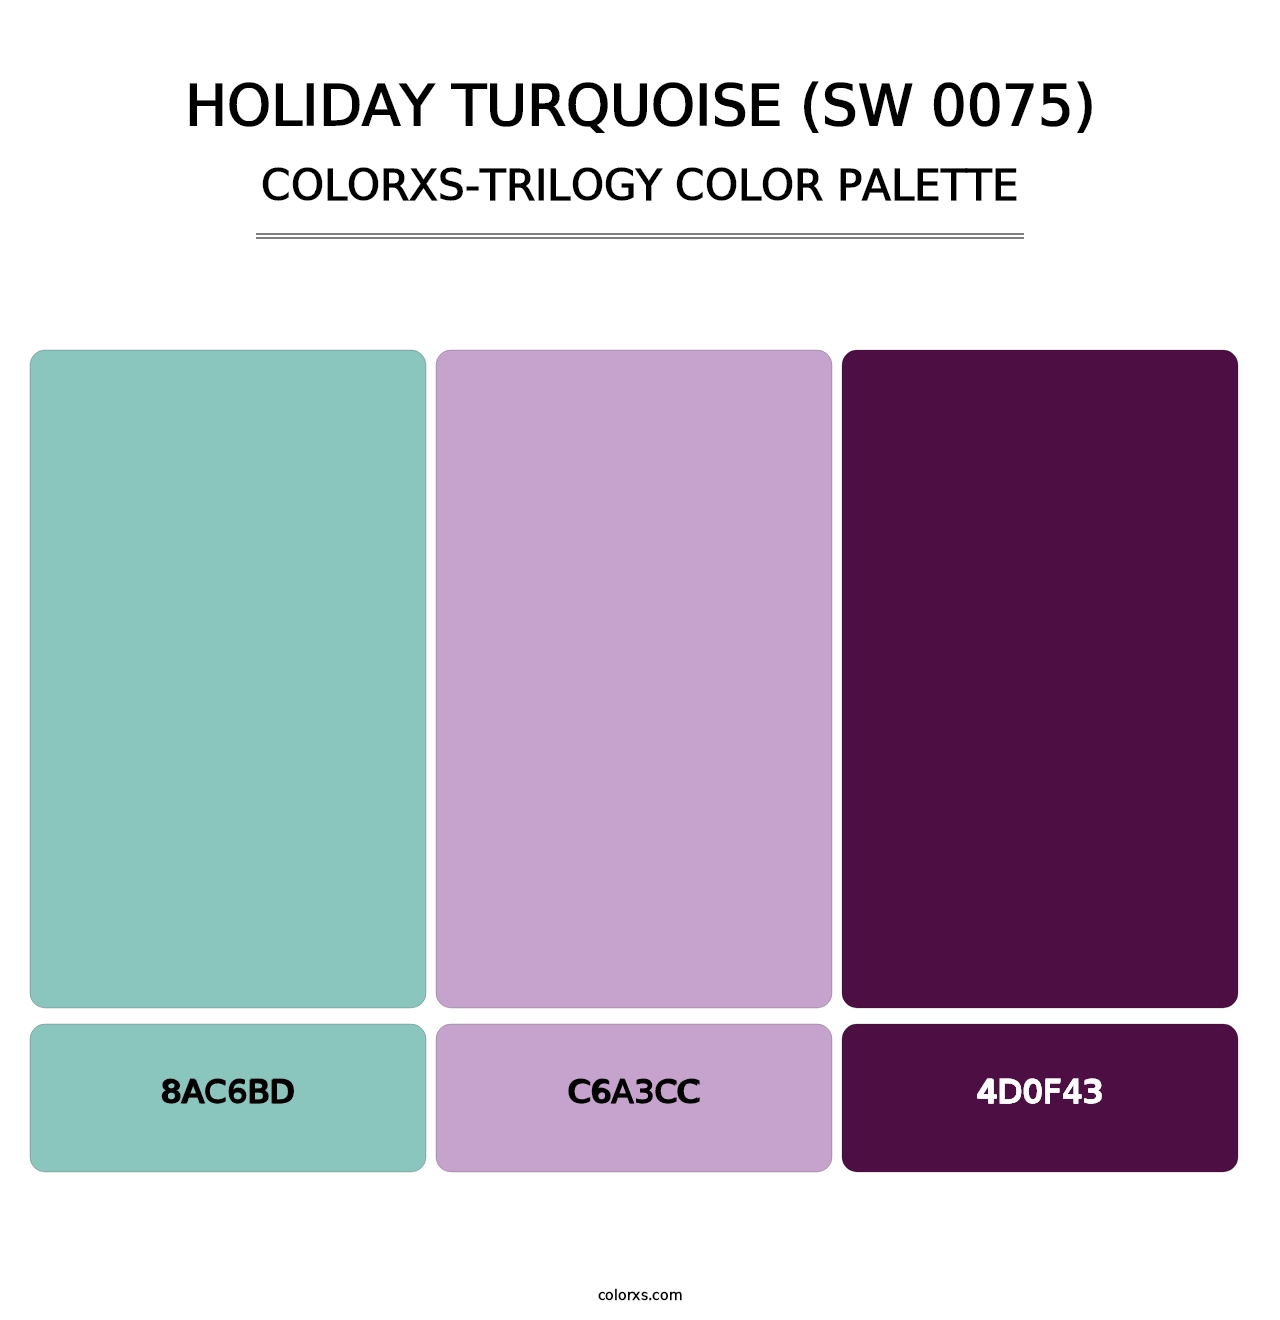 Holiday Turquoise (SW 0075) - Colorxs Trilogy Palette